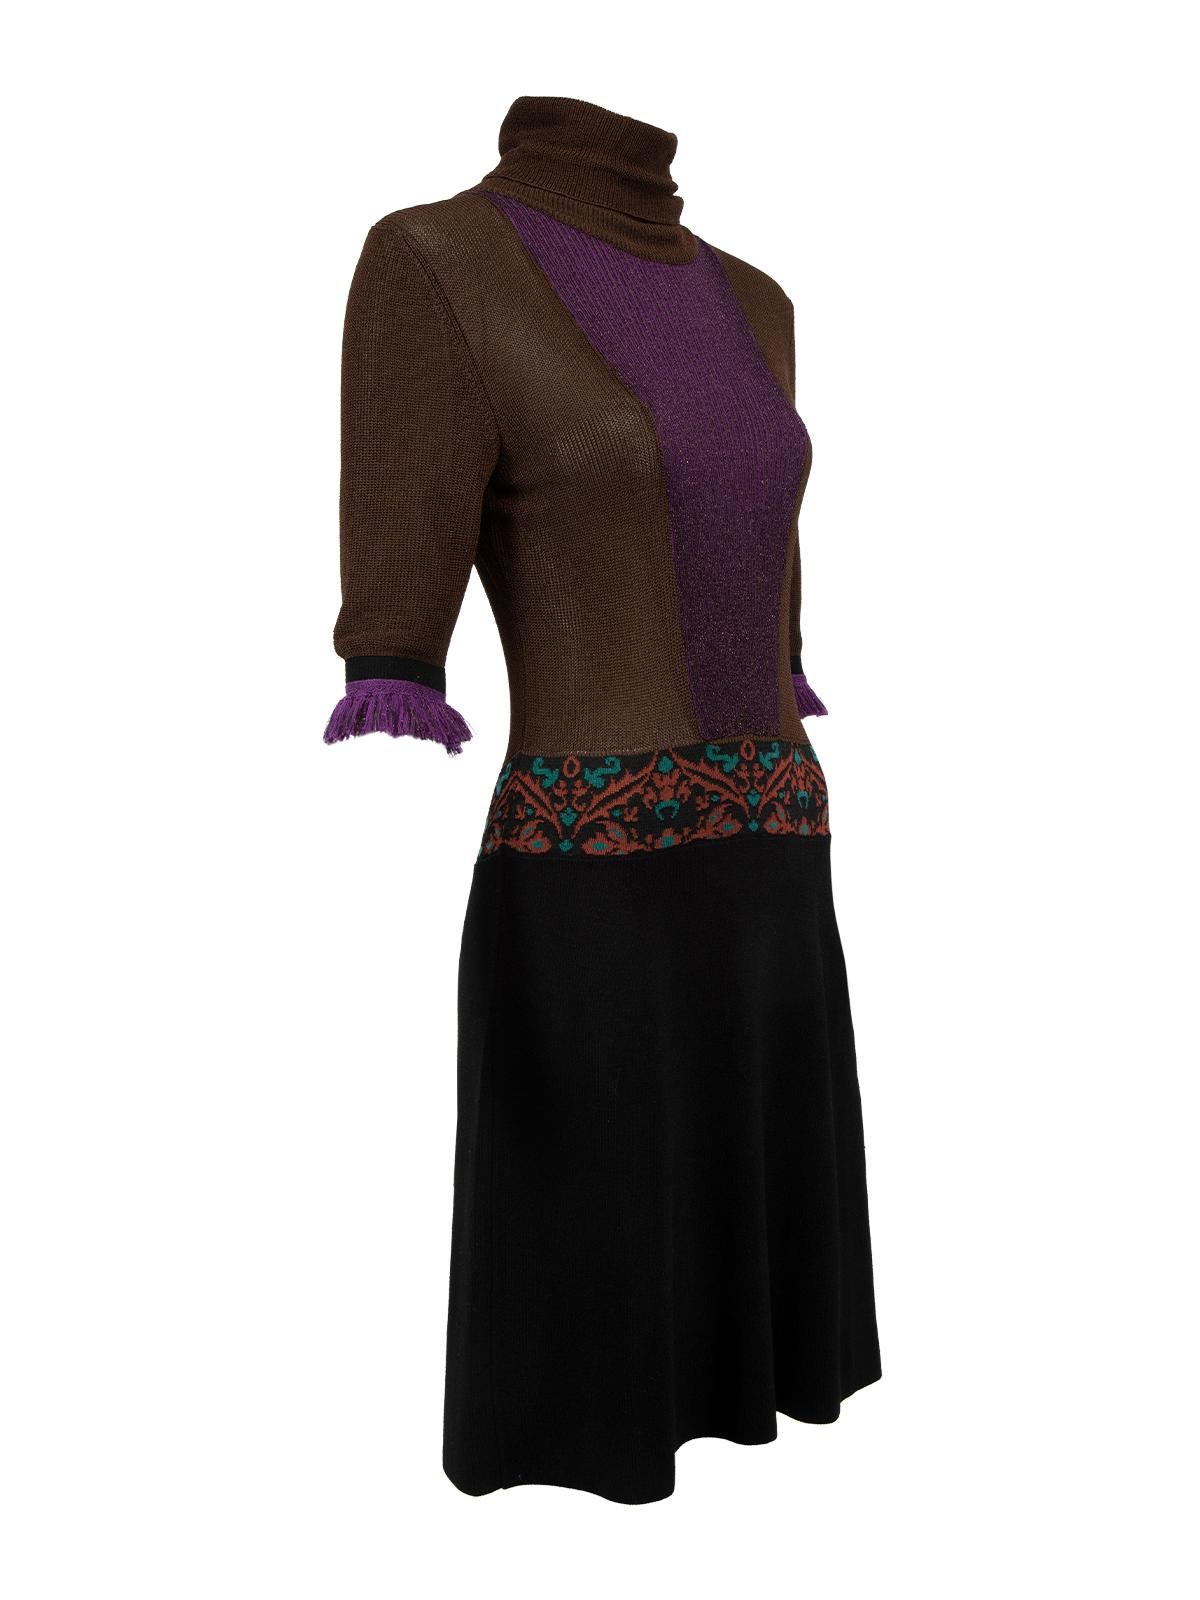 CONDITION is Never worn, with tags. No visible wear to dress is evident on this used Etro designer resale item.   Details  Multicolour- Dark brown, black, purple and green Viscose Knit mini dress Turtleneck Short sleeves Tasseled cuffs in purple